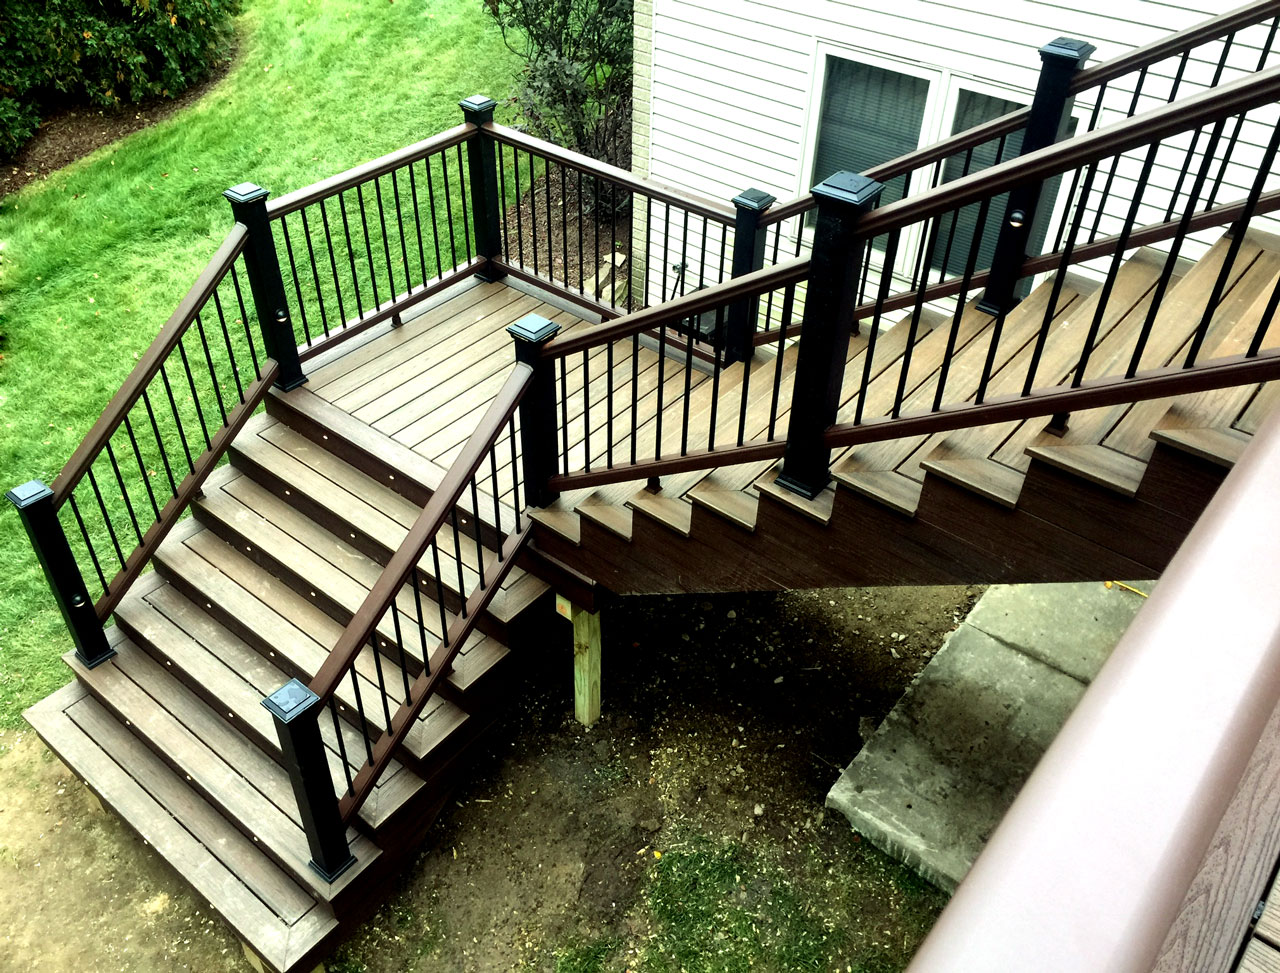 Trex Decking and custom staircase by Deckmaster